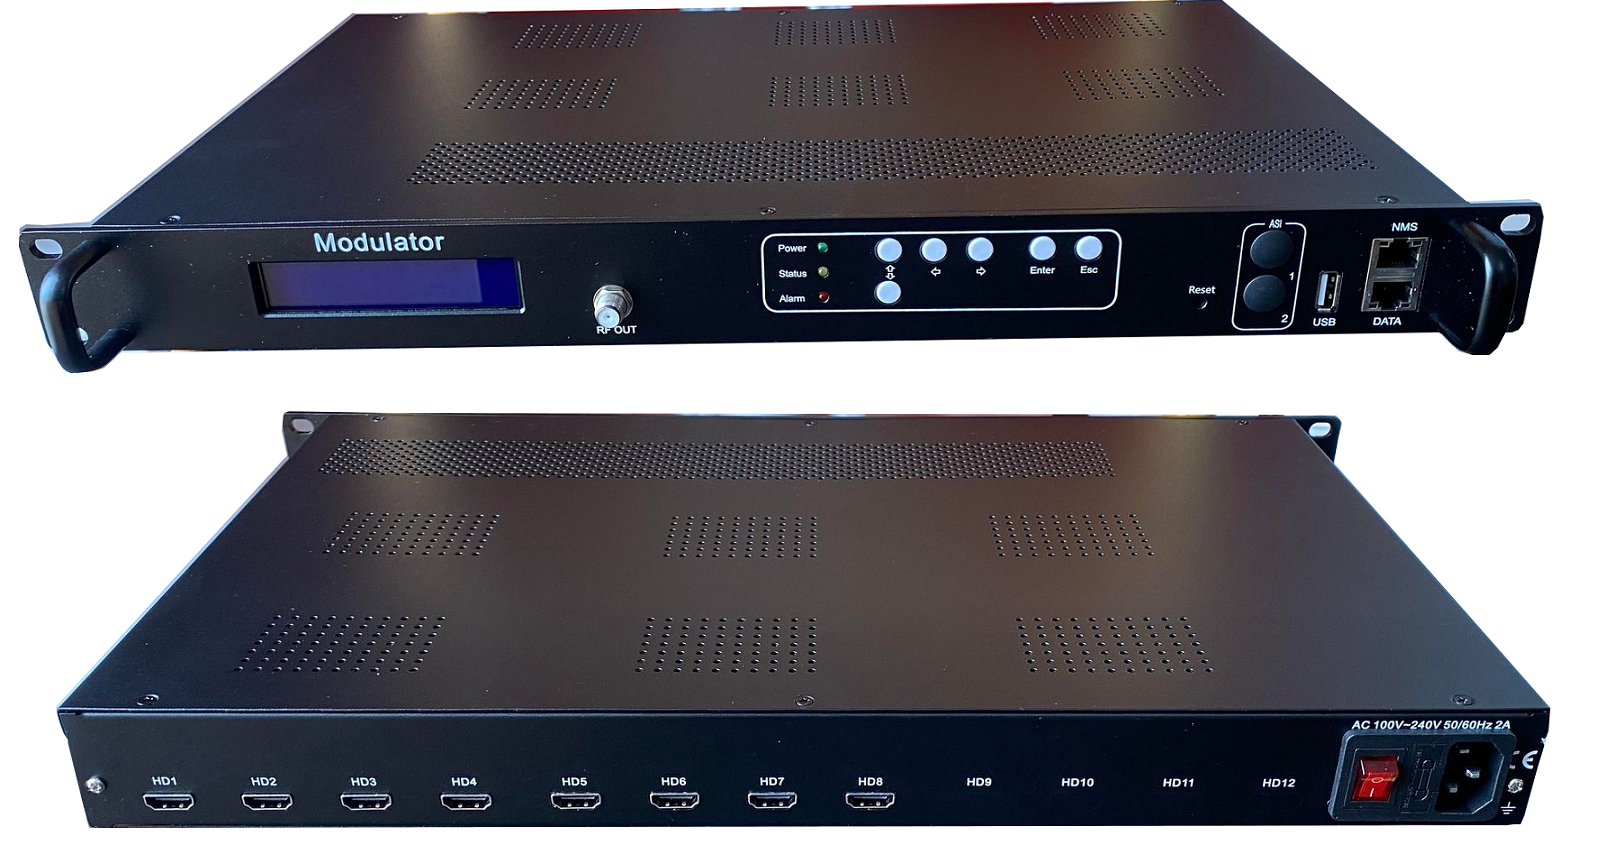 HD244-8  8 x HDMI Input, HD MPEG4 modulator with 4 x DVBT carriers out, and IP in and out.